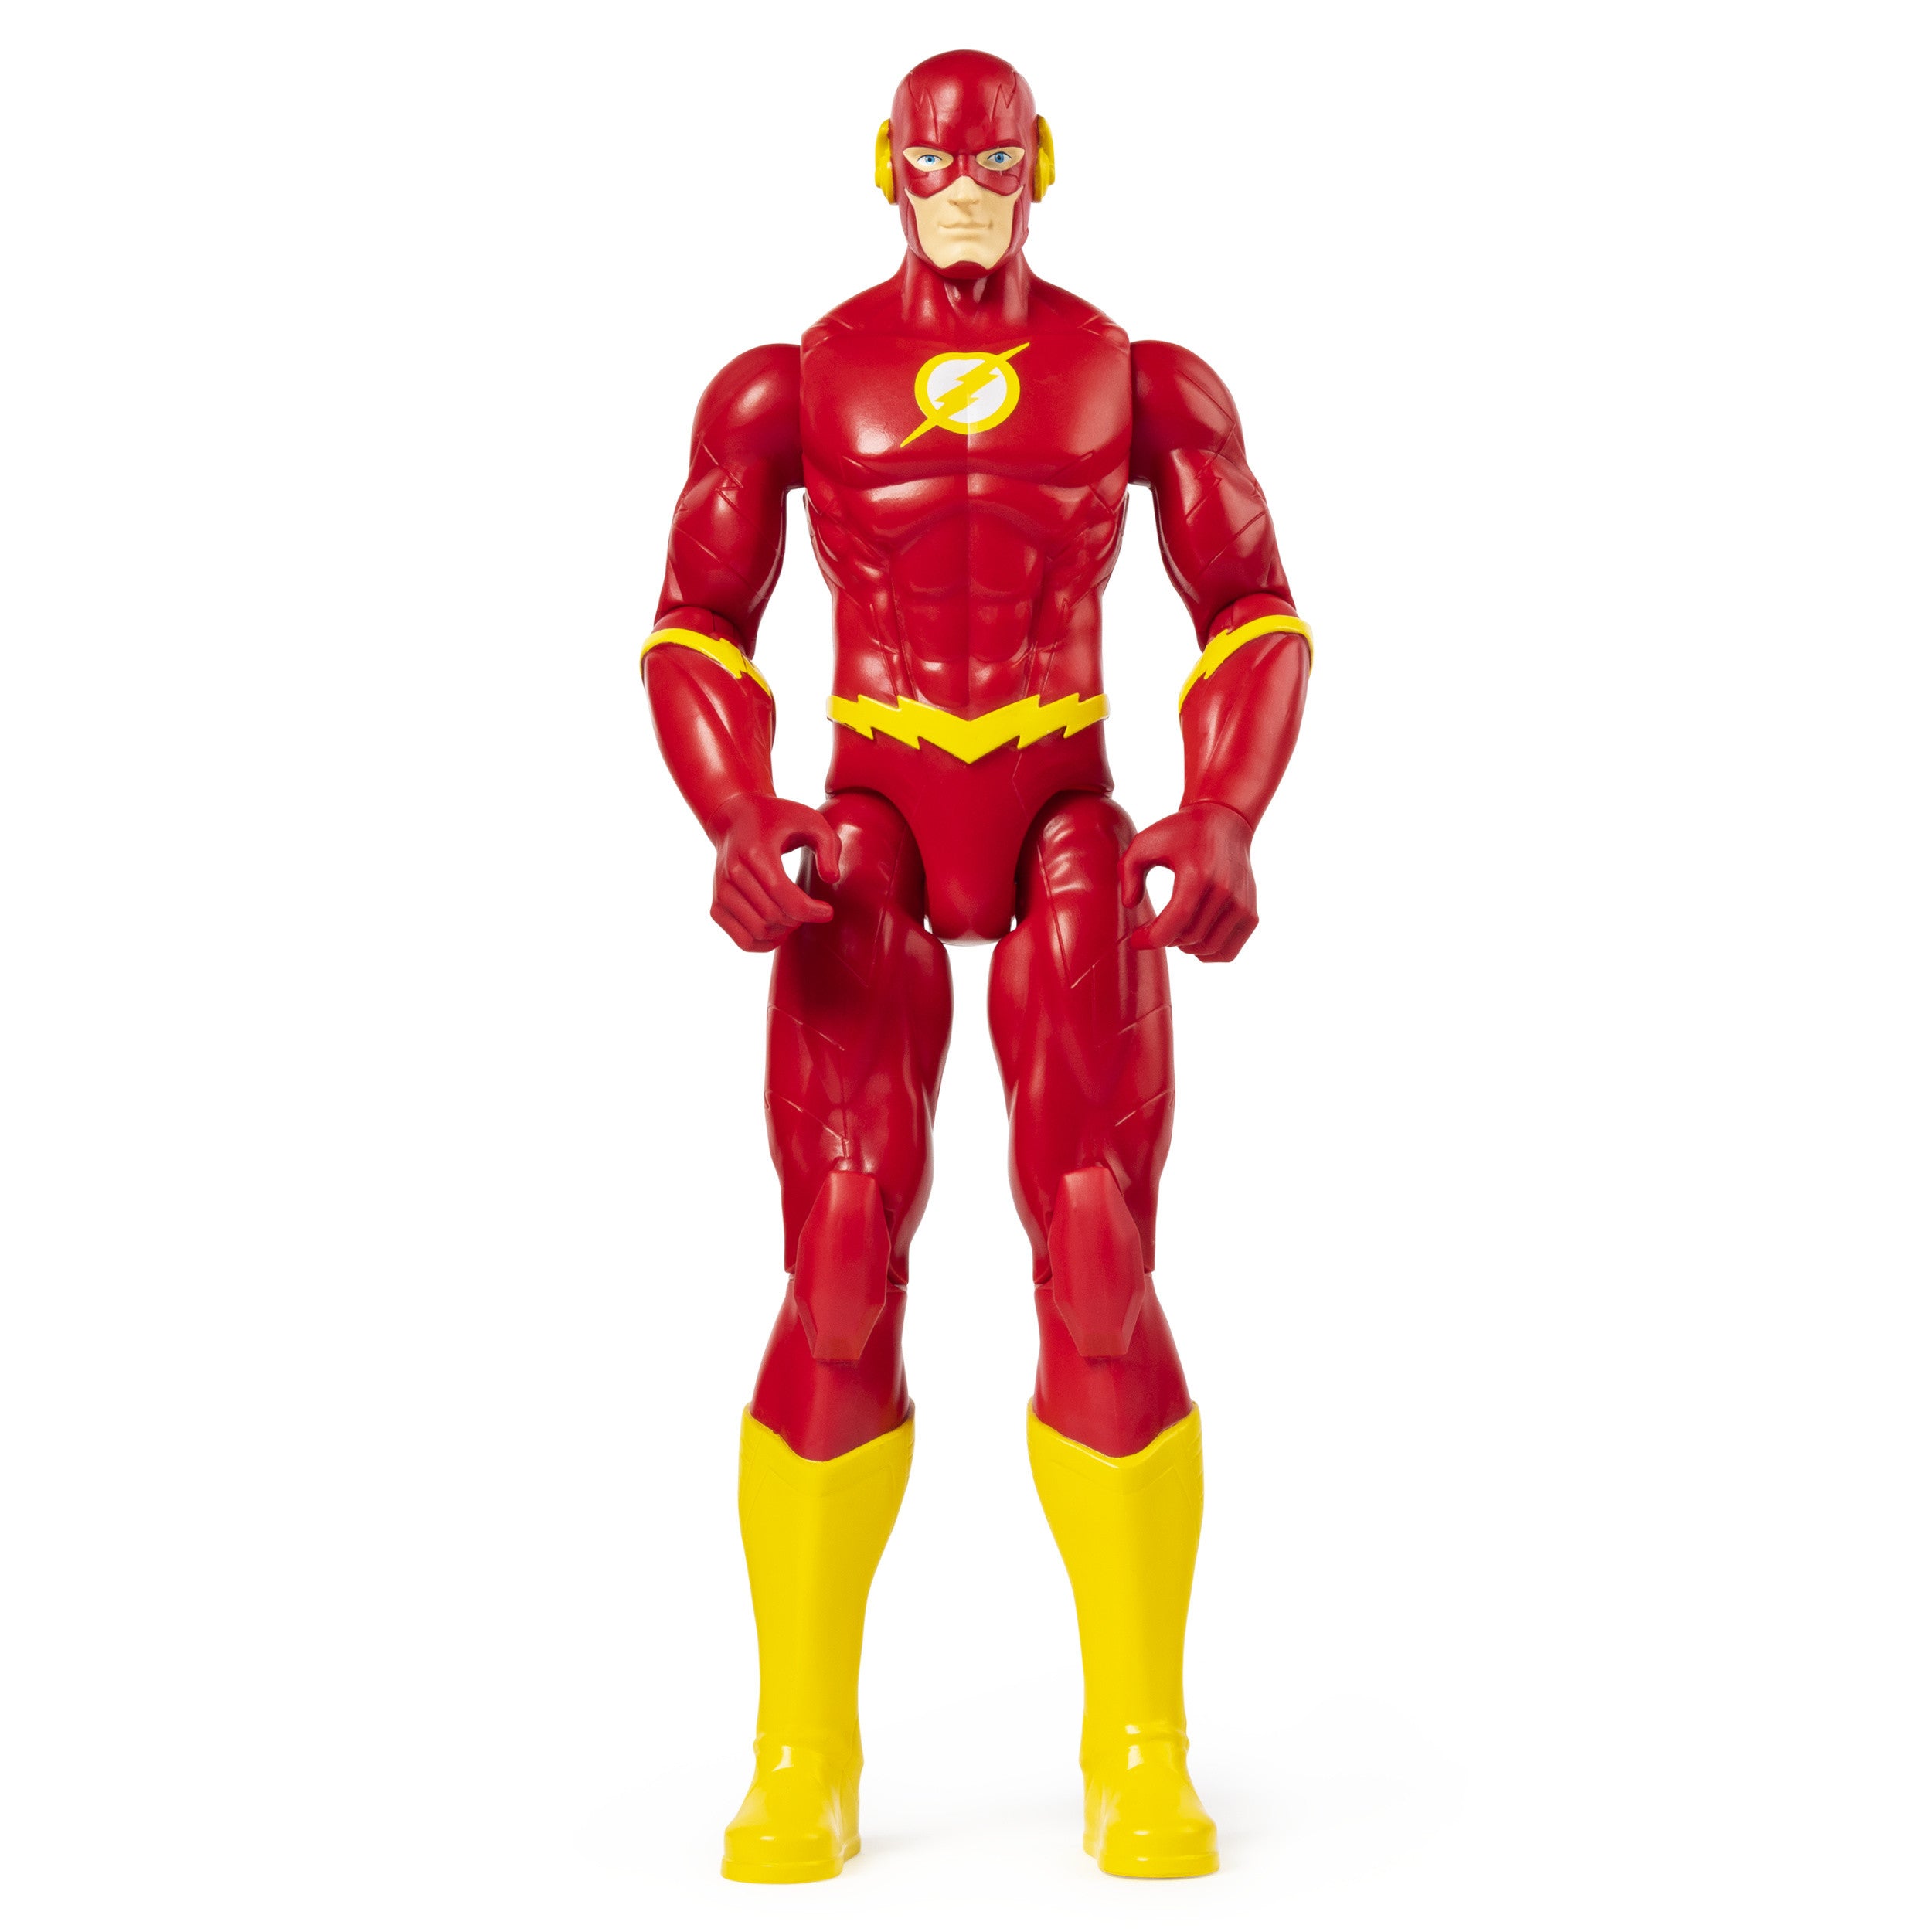 SPIN MASTER - DC Comics, 12-Inch THE FLASH Action Figure, Kids Toys for Boys